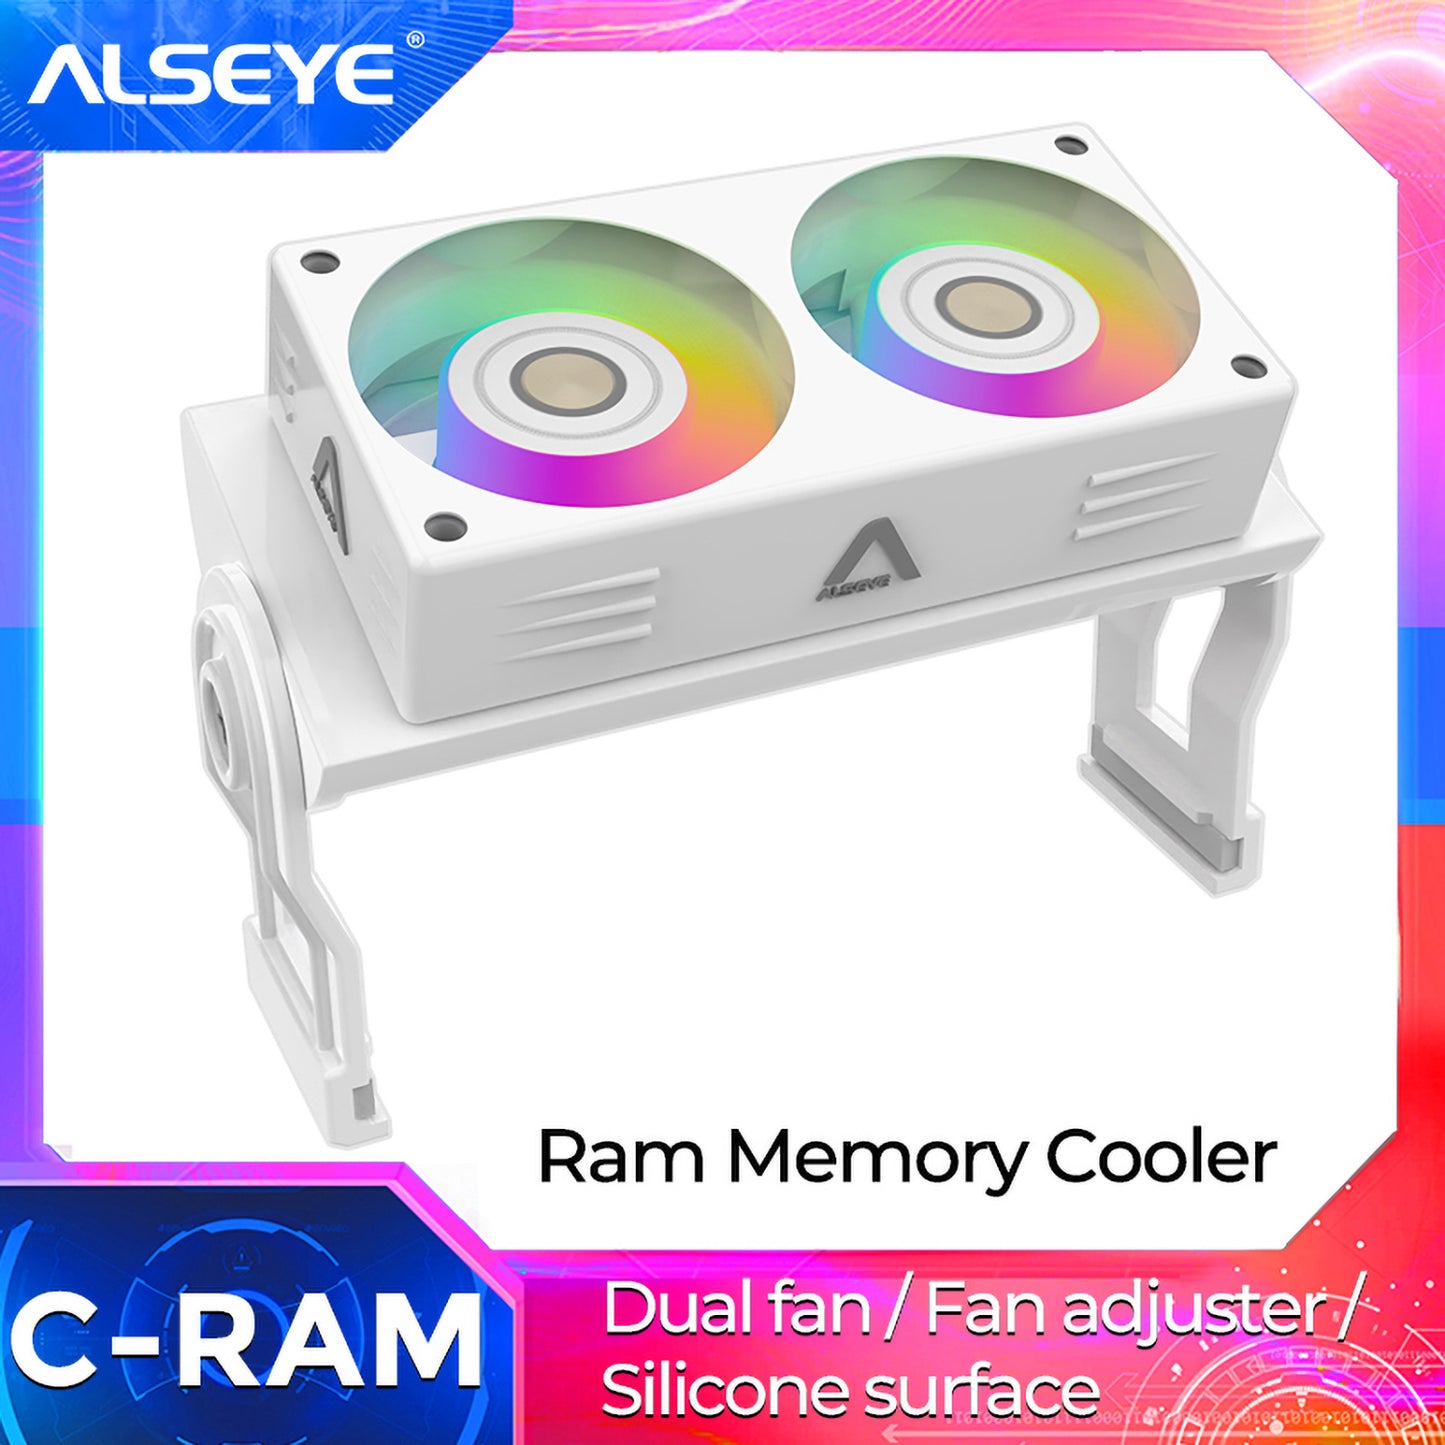 ALSEYE RAM ARGB Memory Cooler White Black 60mm With Dual Fan PWM 1200-2000RPM Radiator for DDR2/3/4/5 Cooling